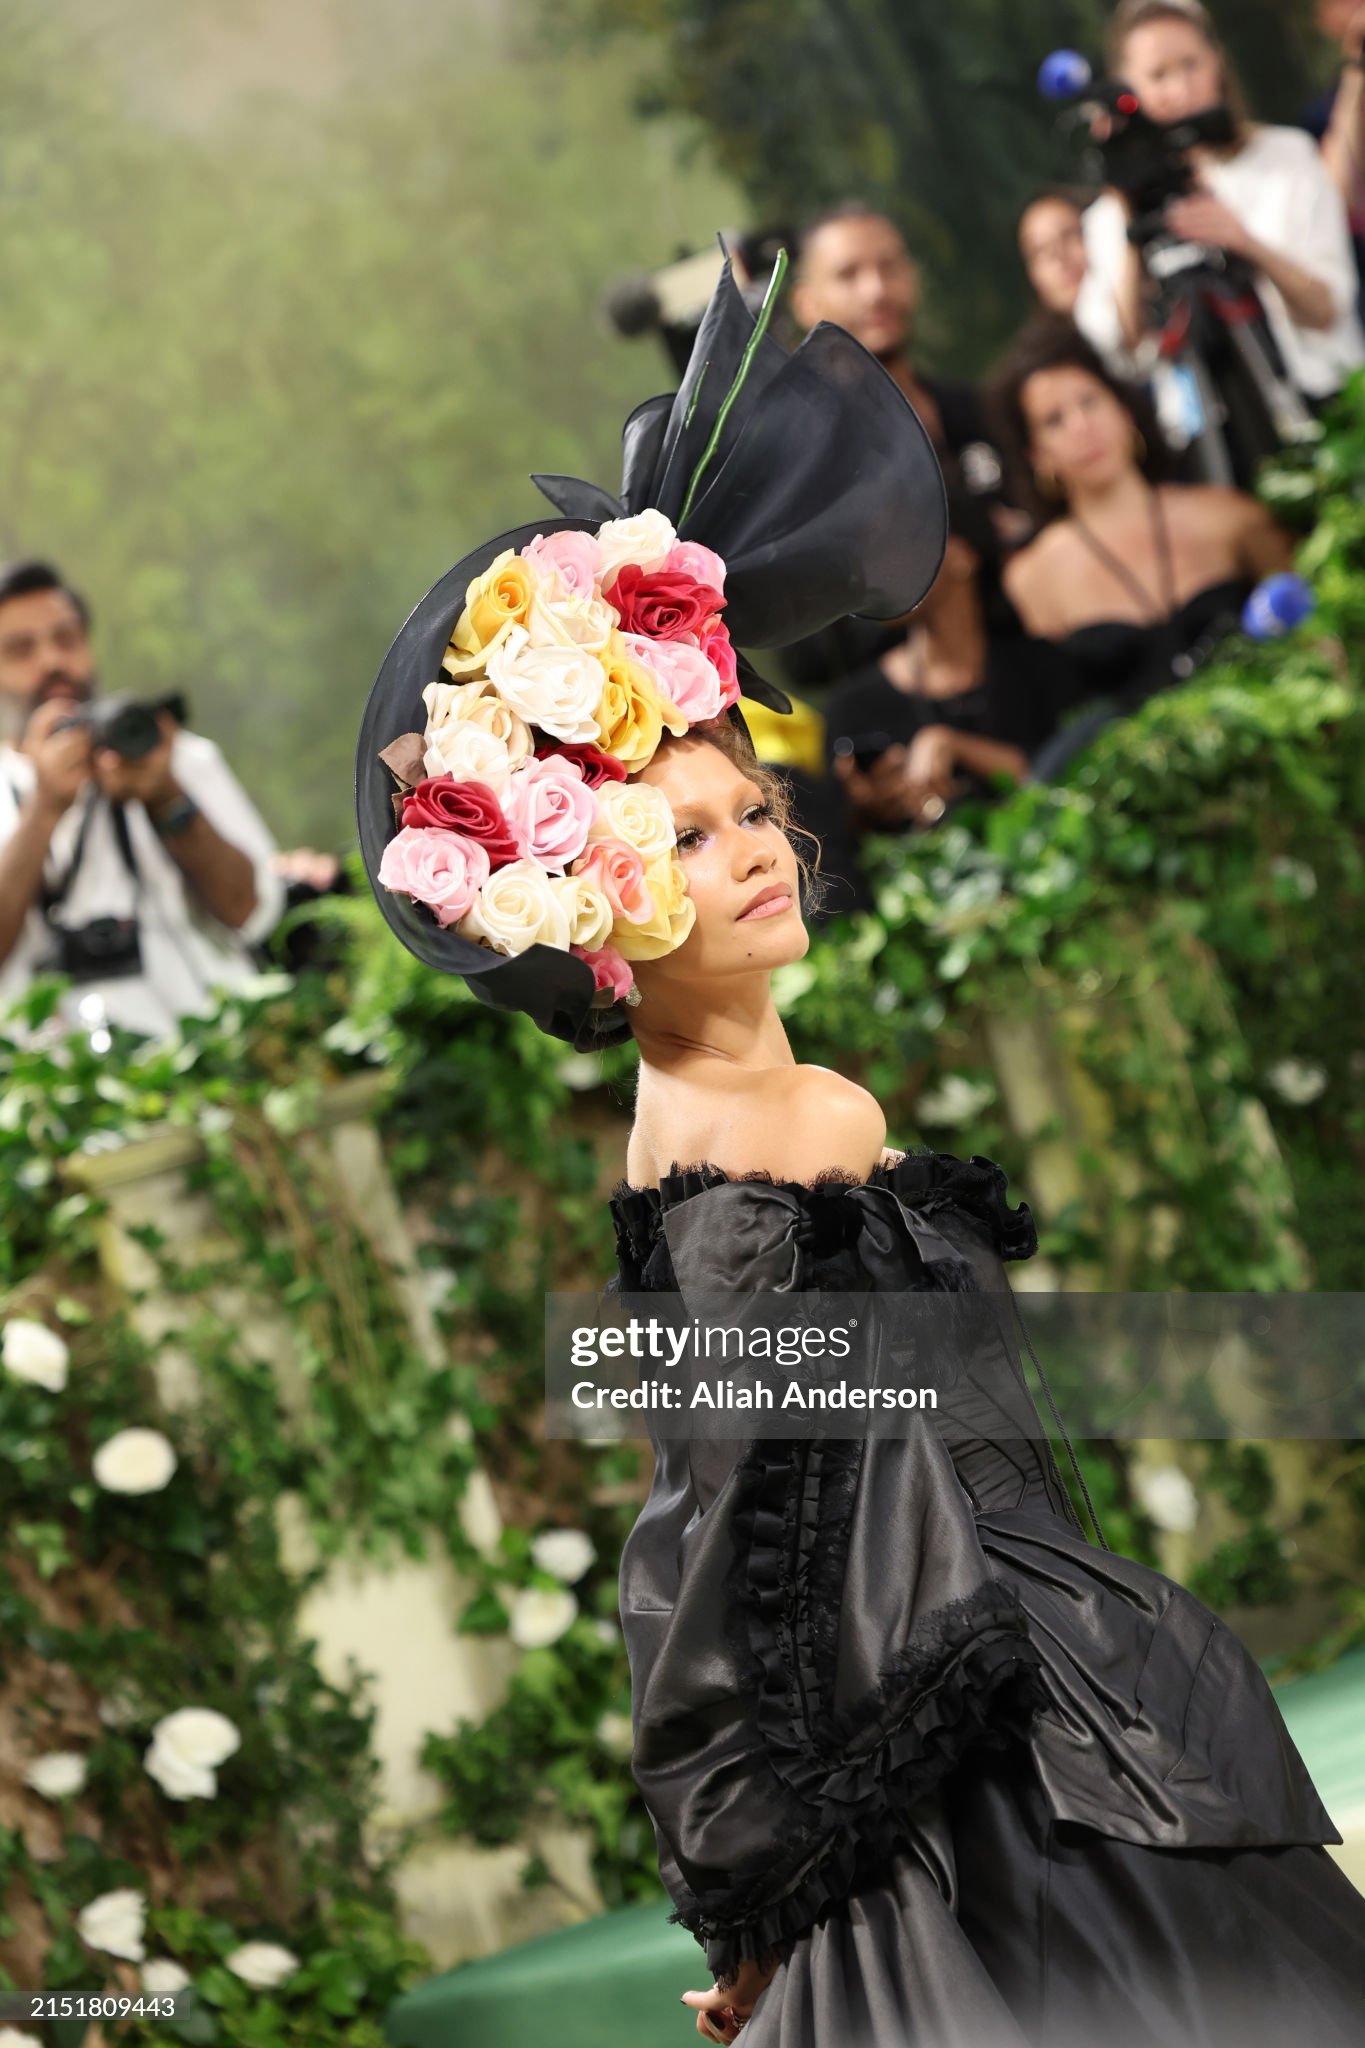 gettyimages-2151809443-2048x2048.jpg